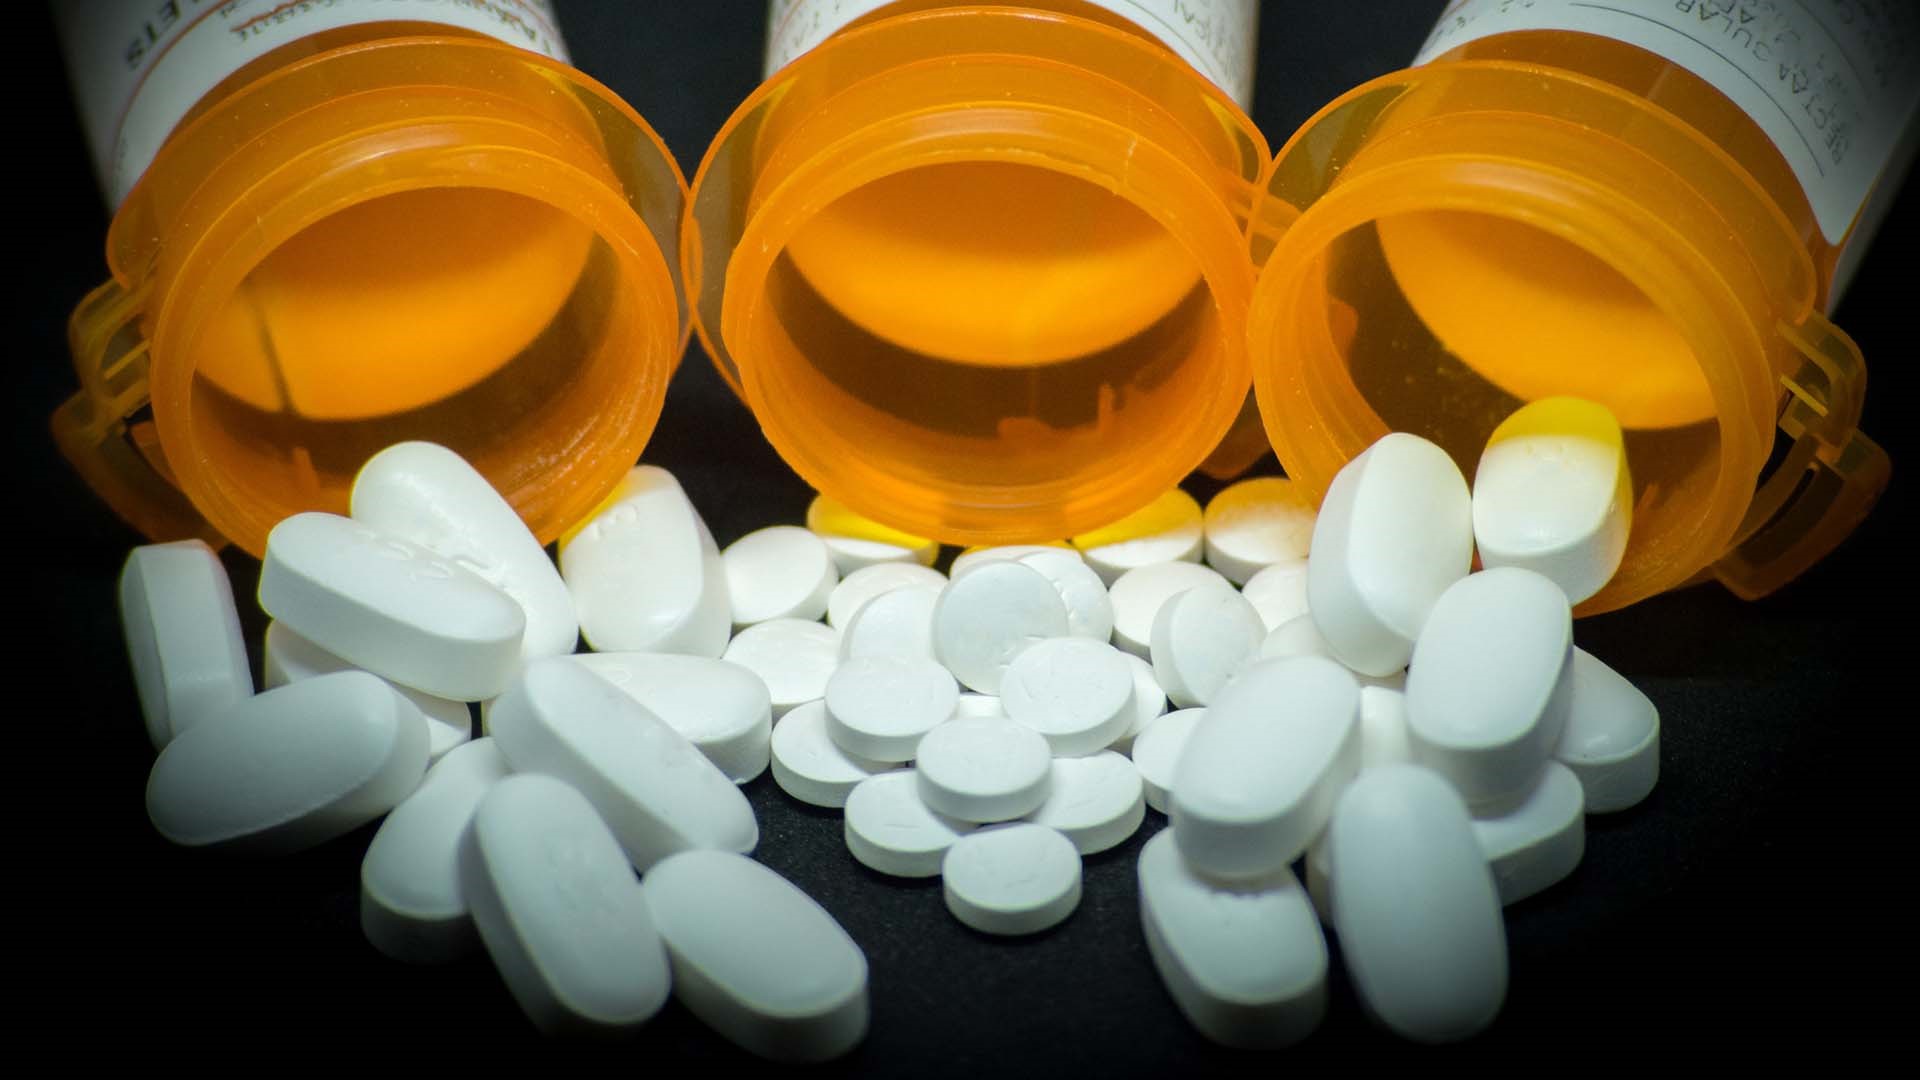 There have been a string of recalls involving blood pressure medications since July 2018 due to cancer-causing impurities.